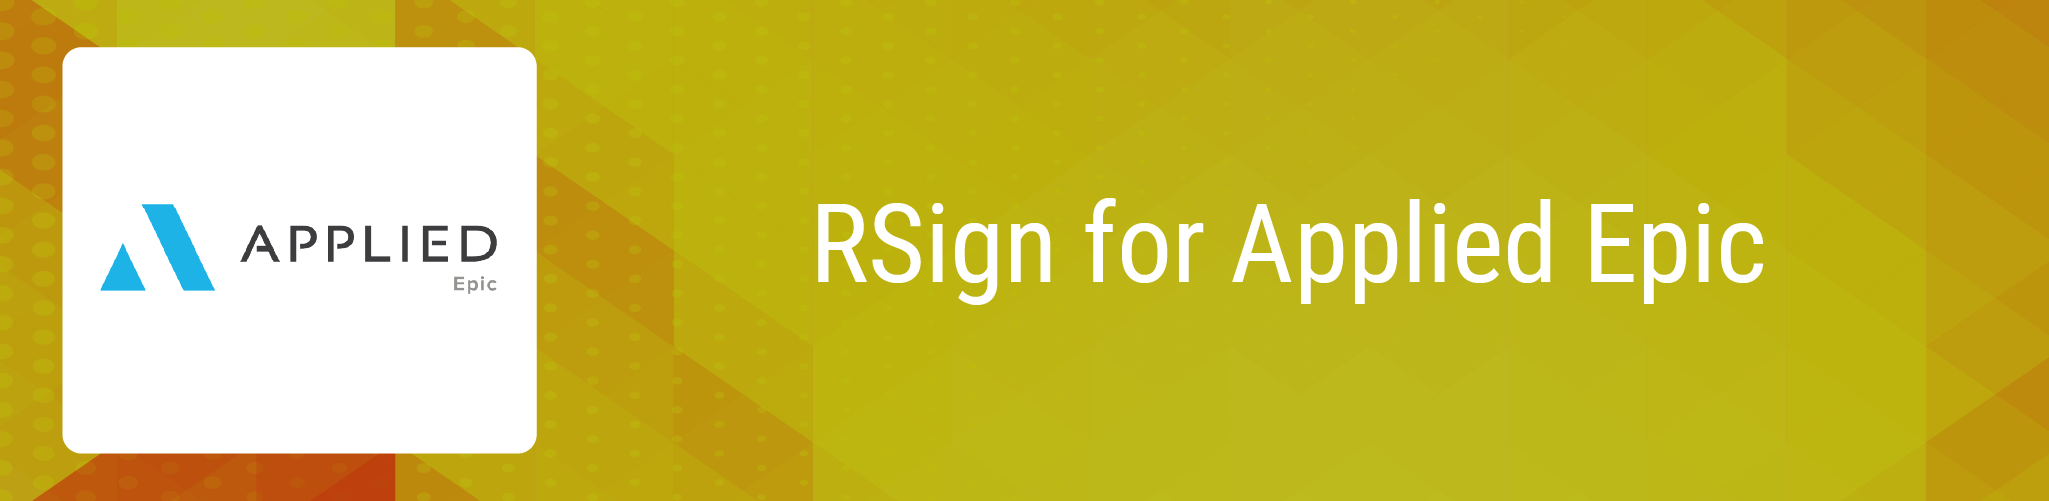 RSign for Applied Epic